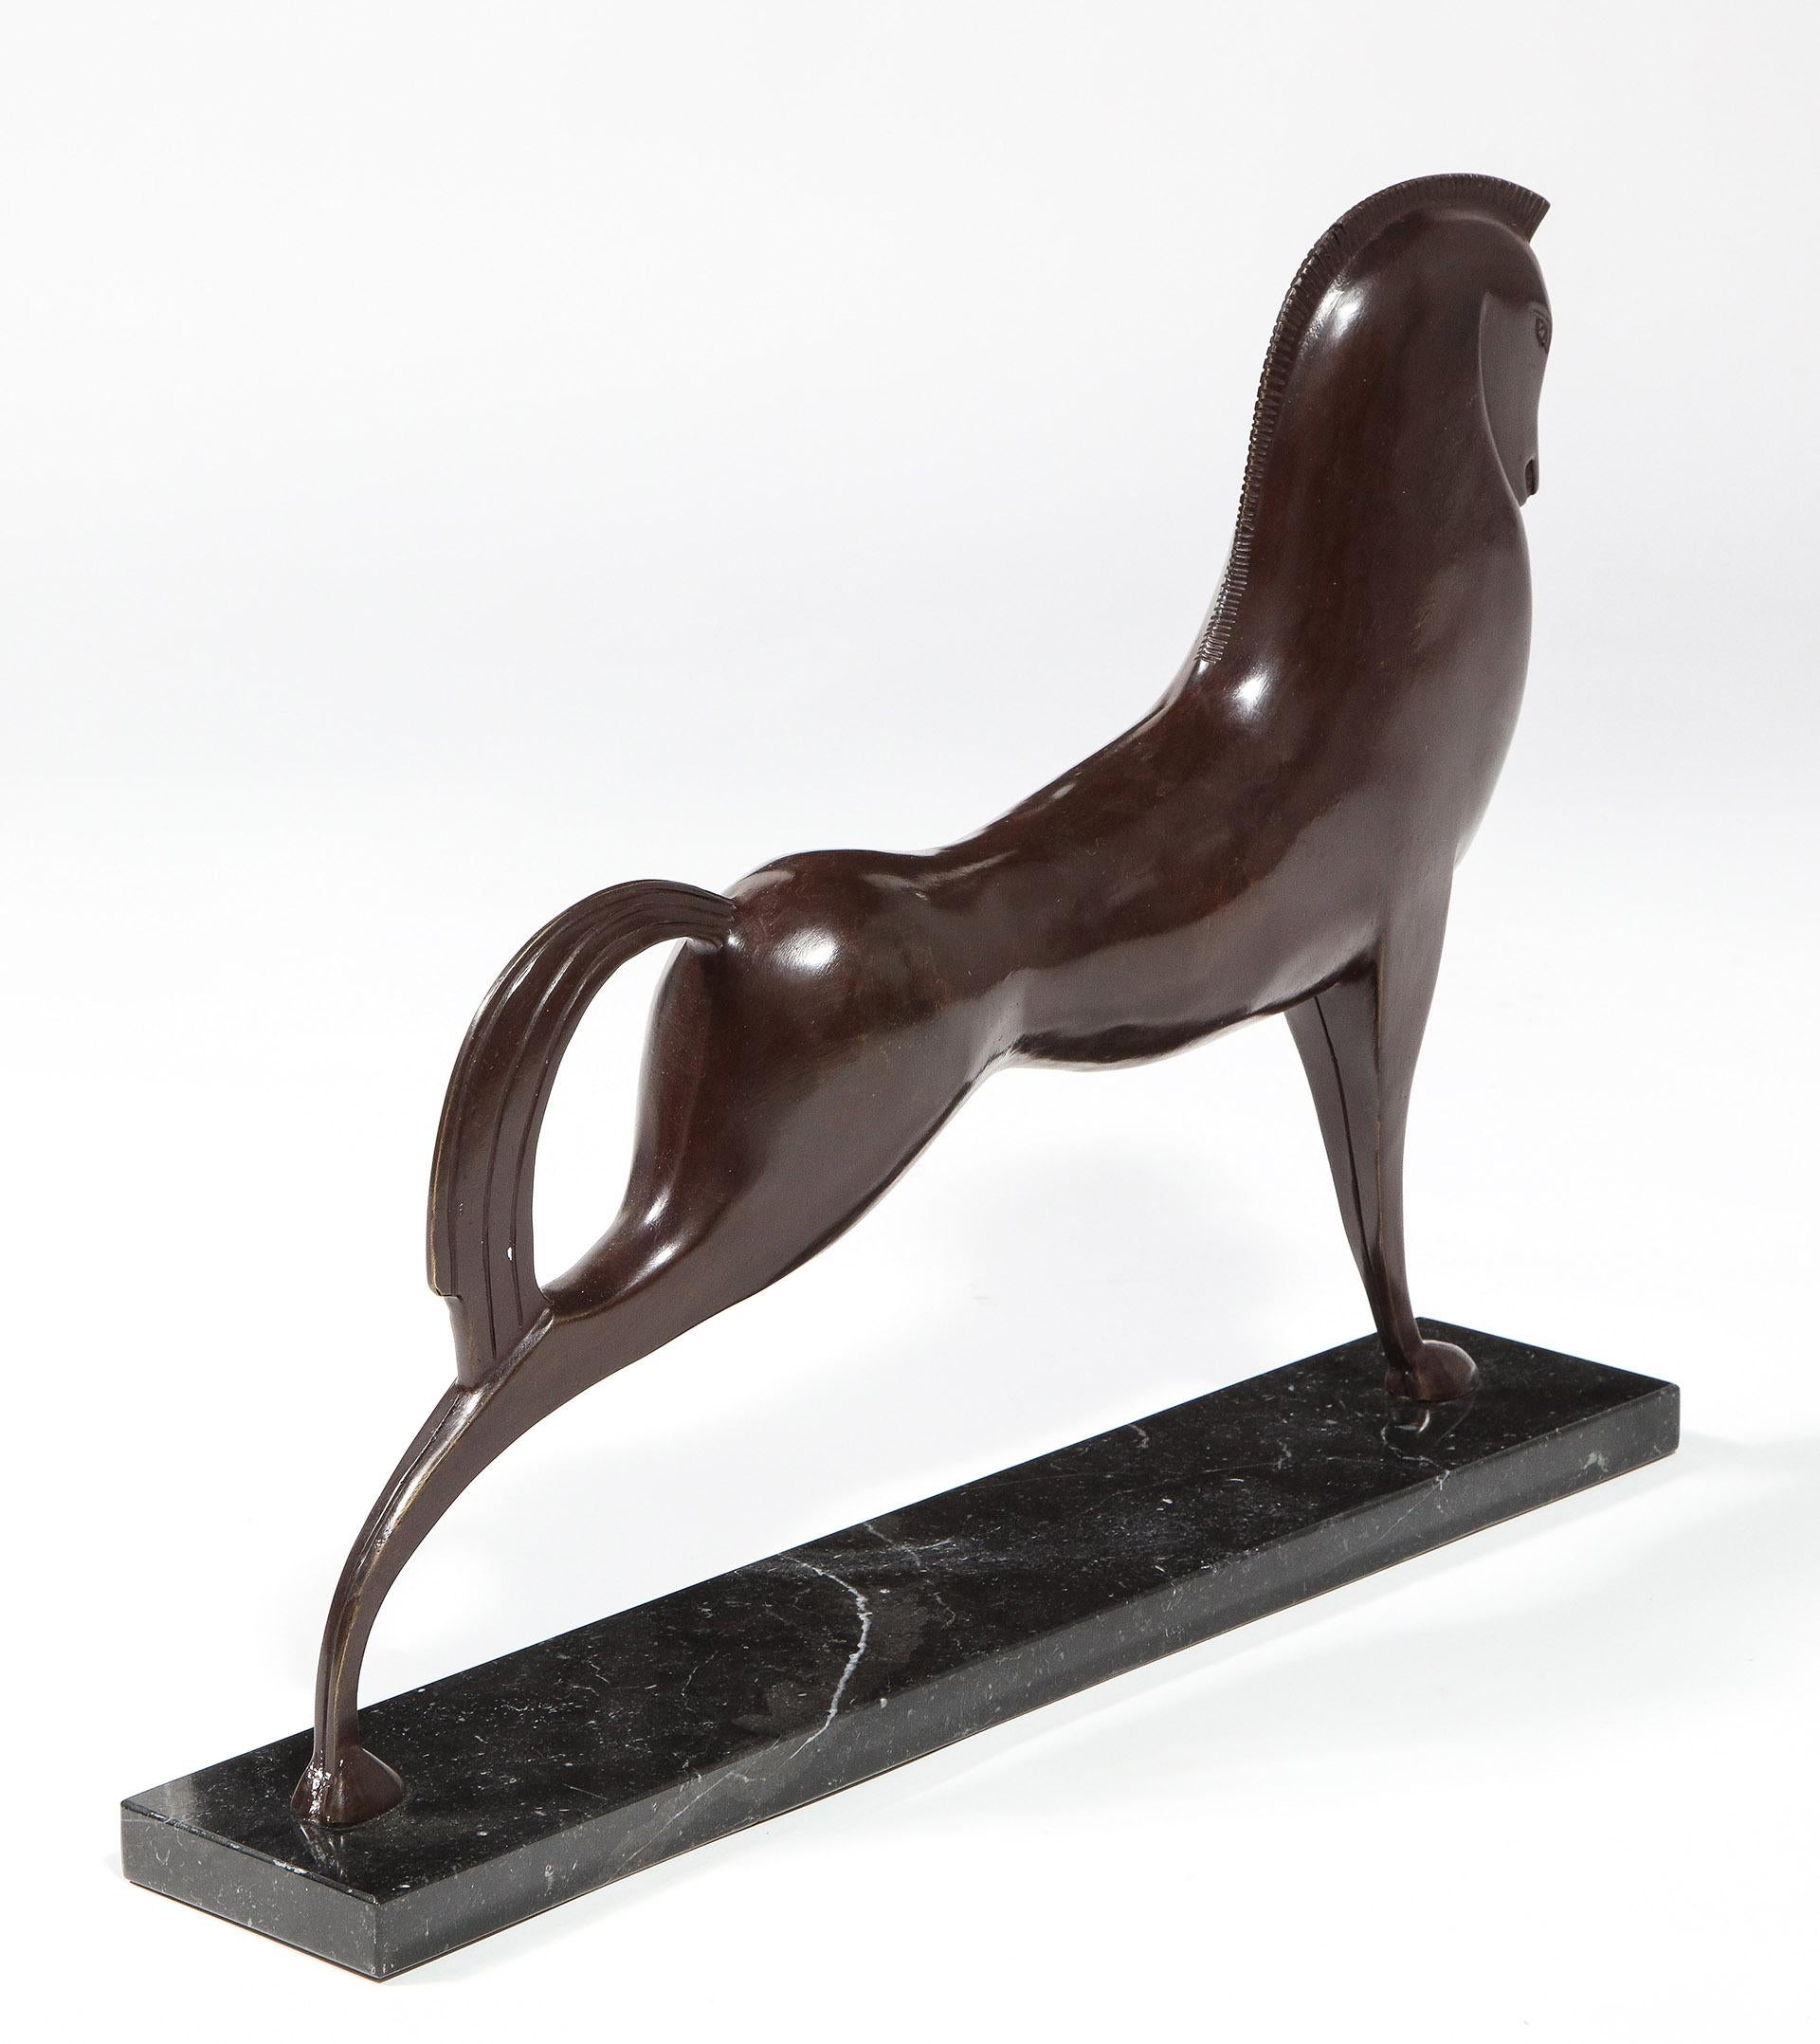 Bronze Sculpture of a Horse in a Classical Greek Style 1